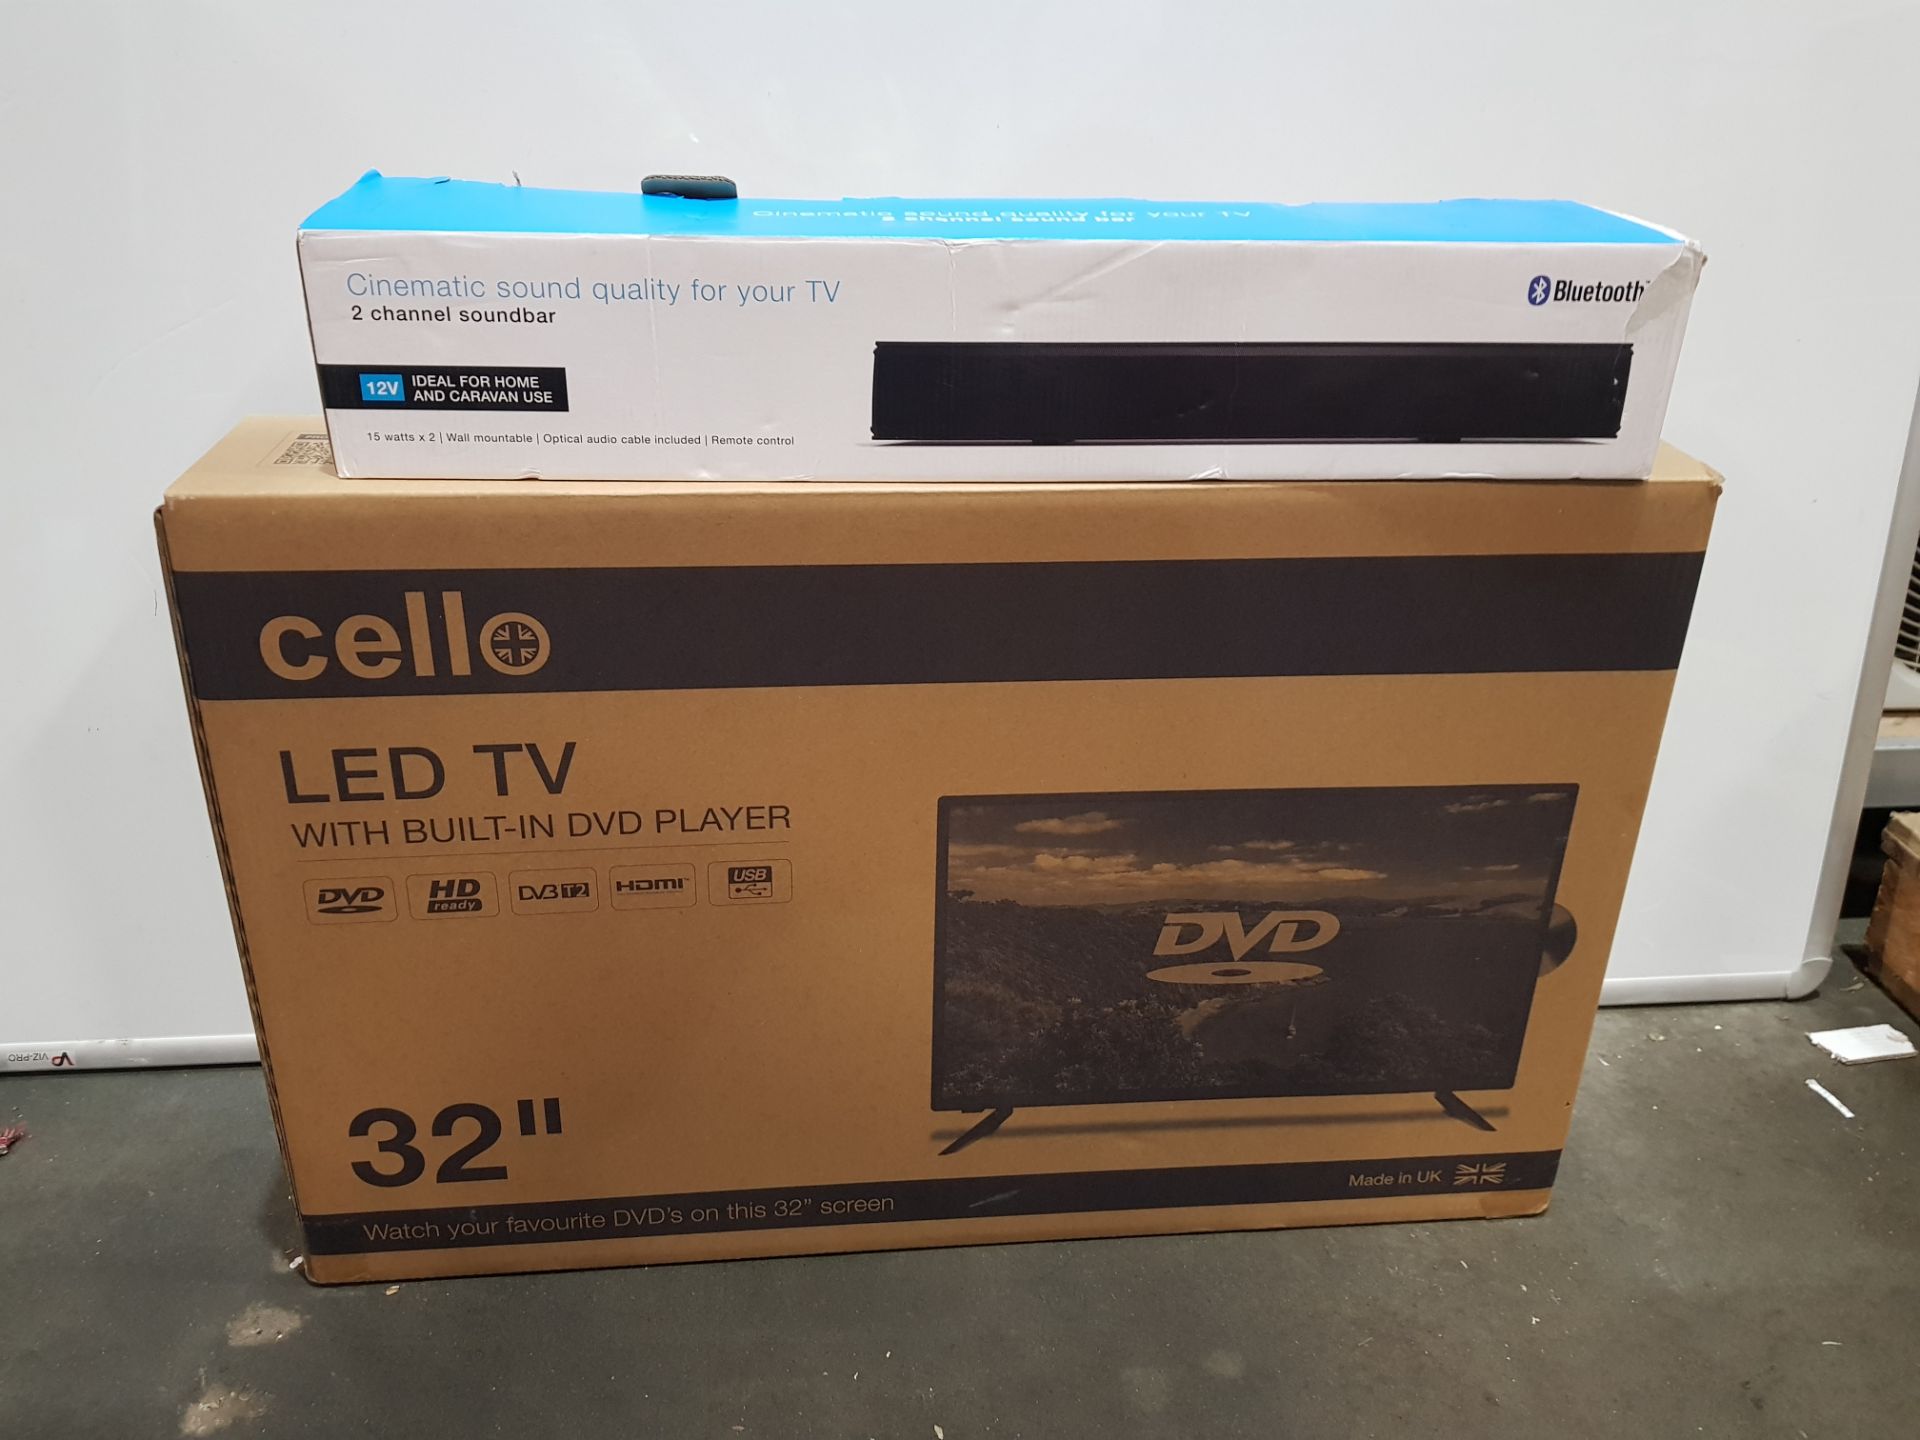 1 X CELLO 32'' LED TV WITH BUILT IN DVD PLAYER BOXED (GRADE A-) WITH 1 X 2 CHANNEL BLUETOOTH